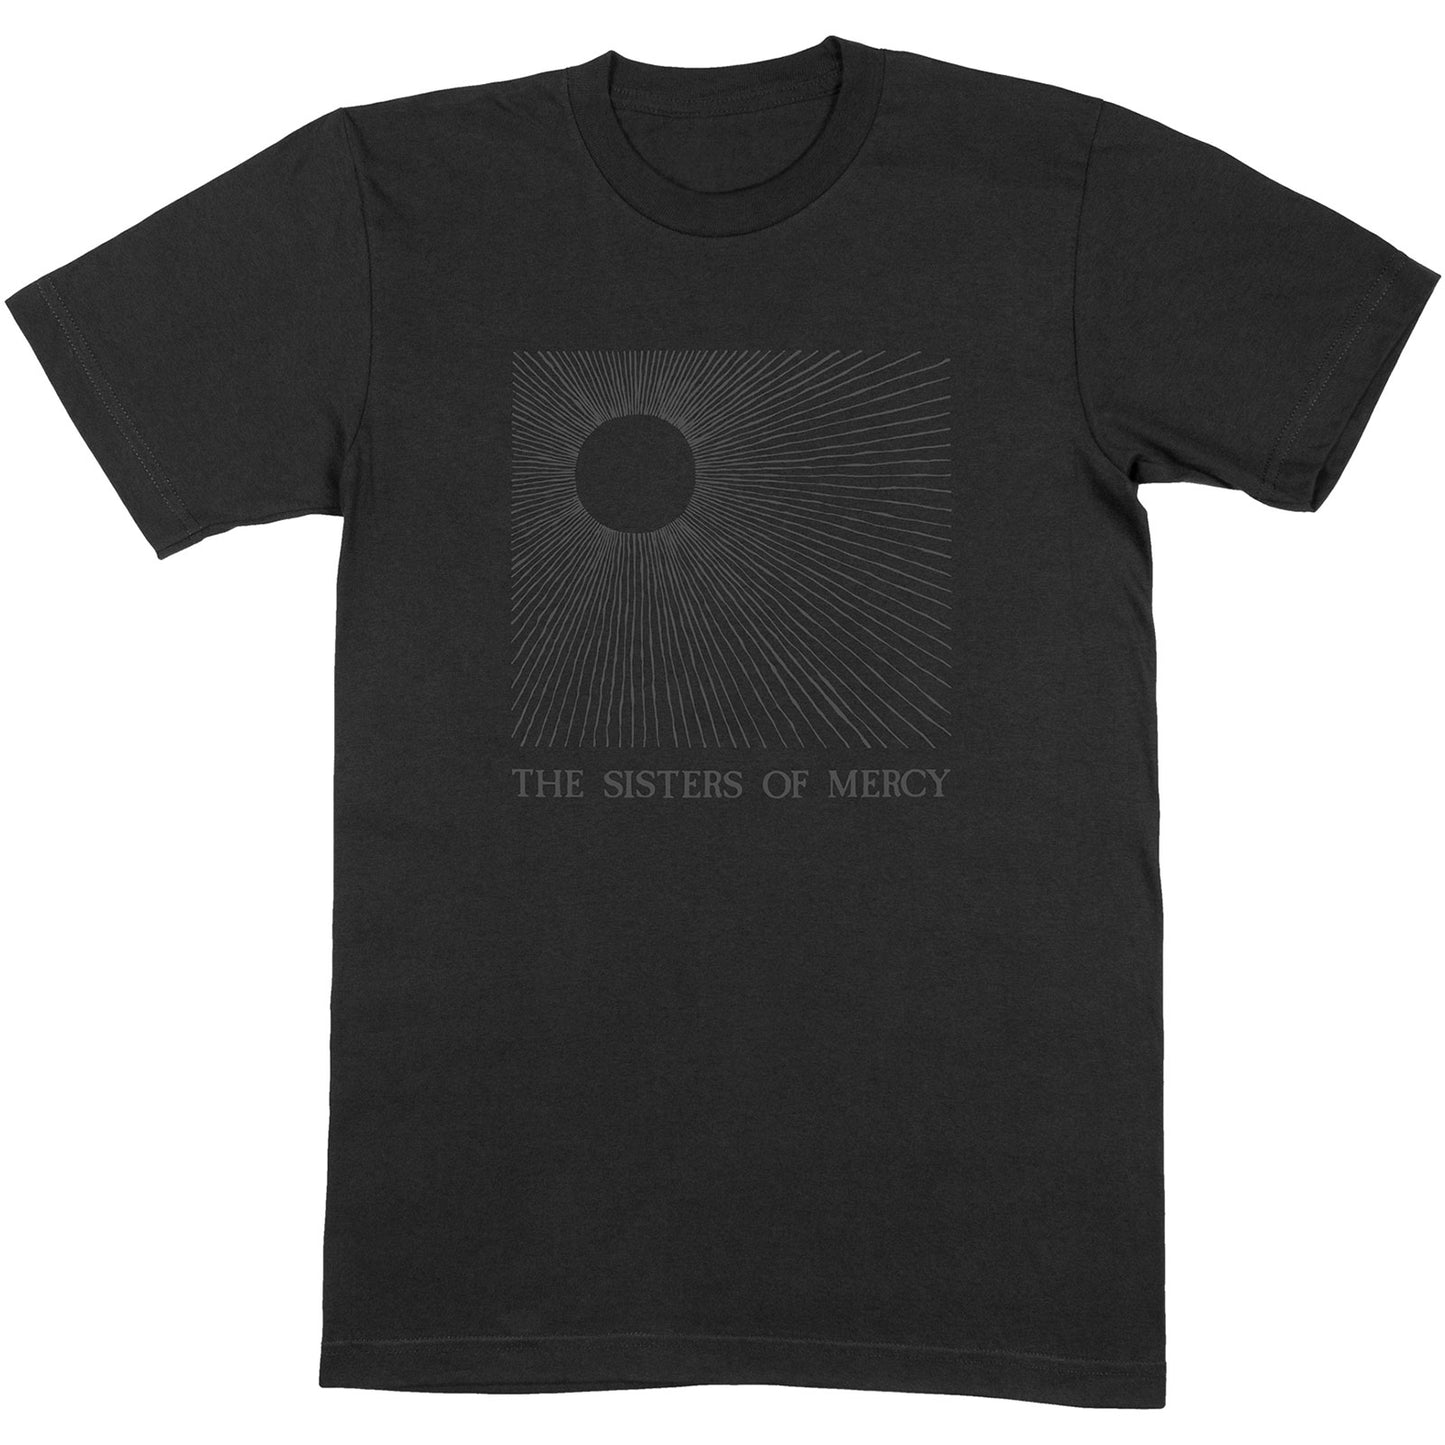 The Sisters of Mercy T-Shirt: Temple of Love